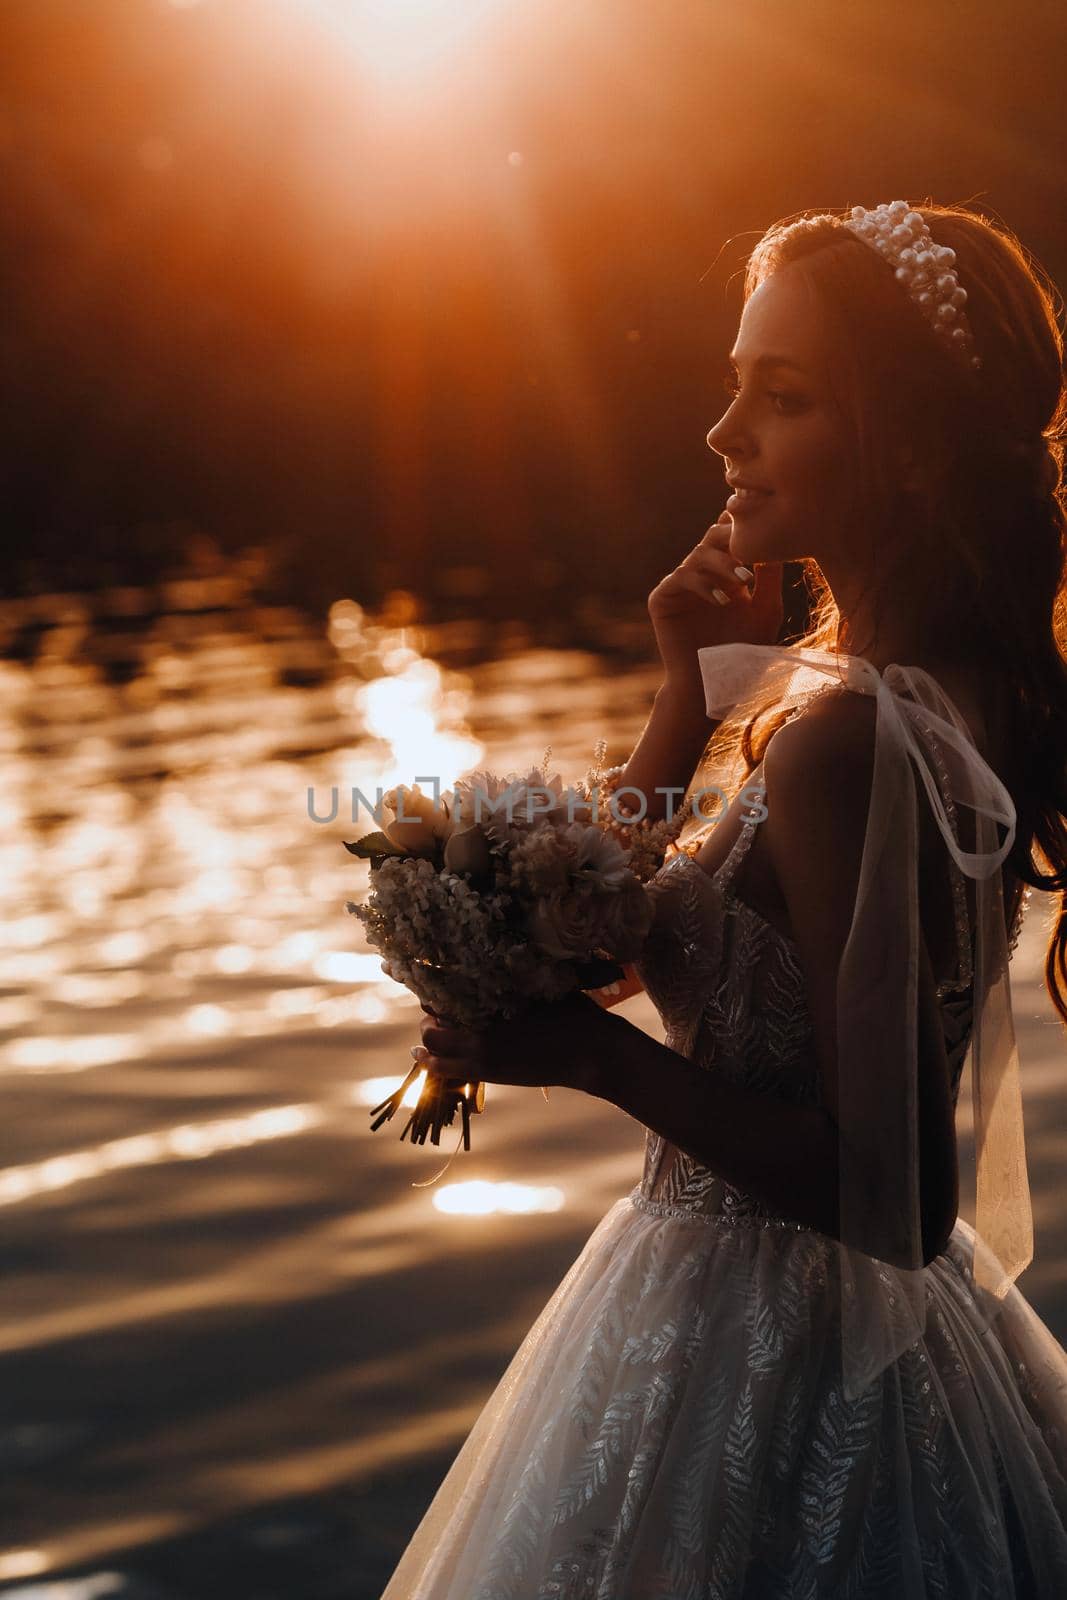 An elegant bride in a white dress and gloves stands by the river in the Park with a bouquet, enjoying nature at sunset.A model in a wedding dress and gloves in a nature Park.Belarus by Lobachad